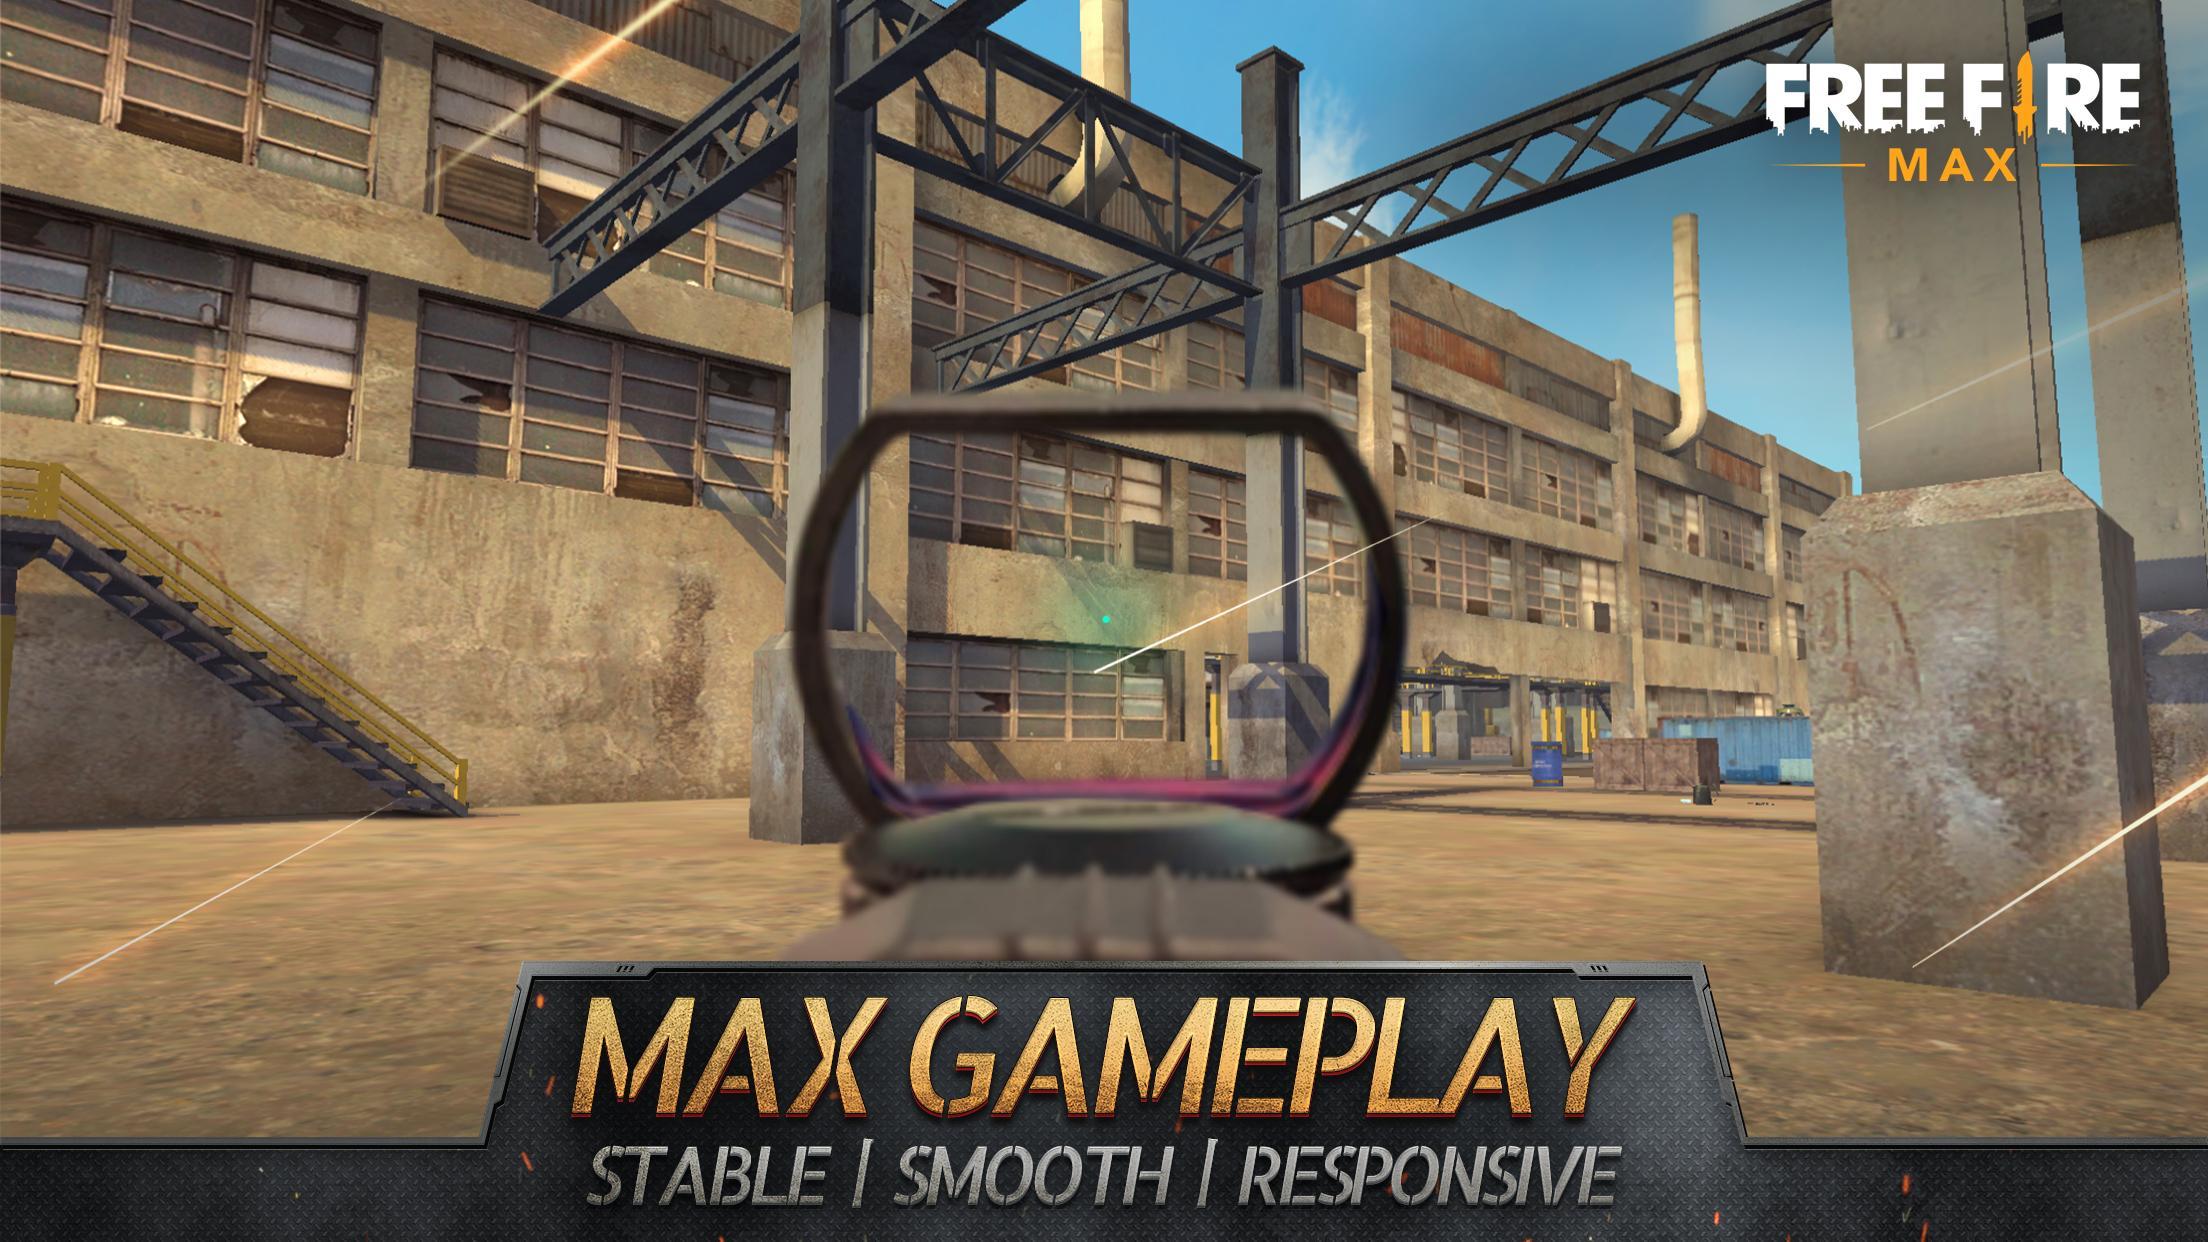 Download Free Fire Max Android Logitheque En